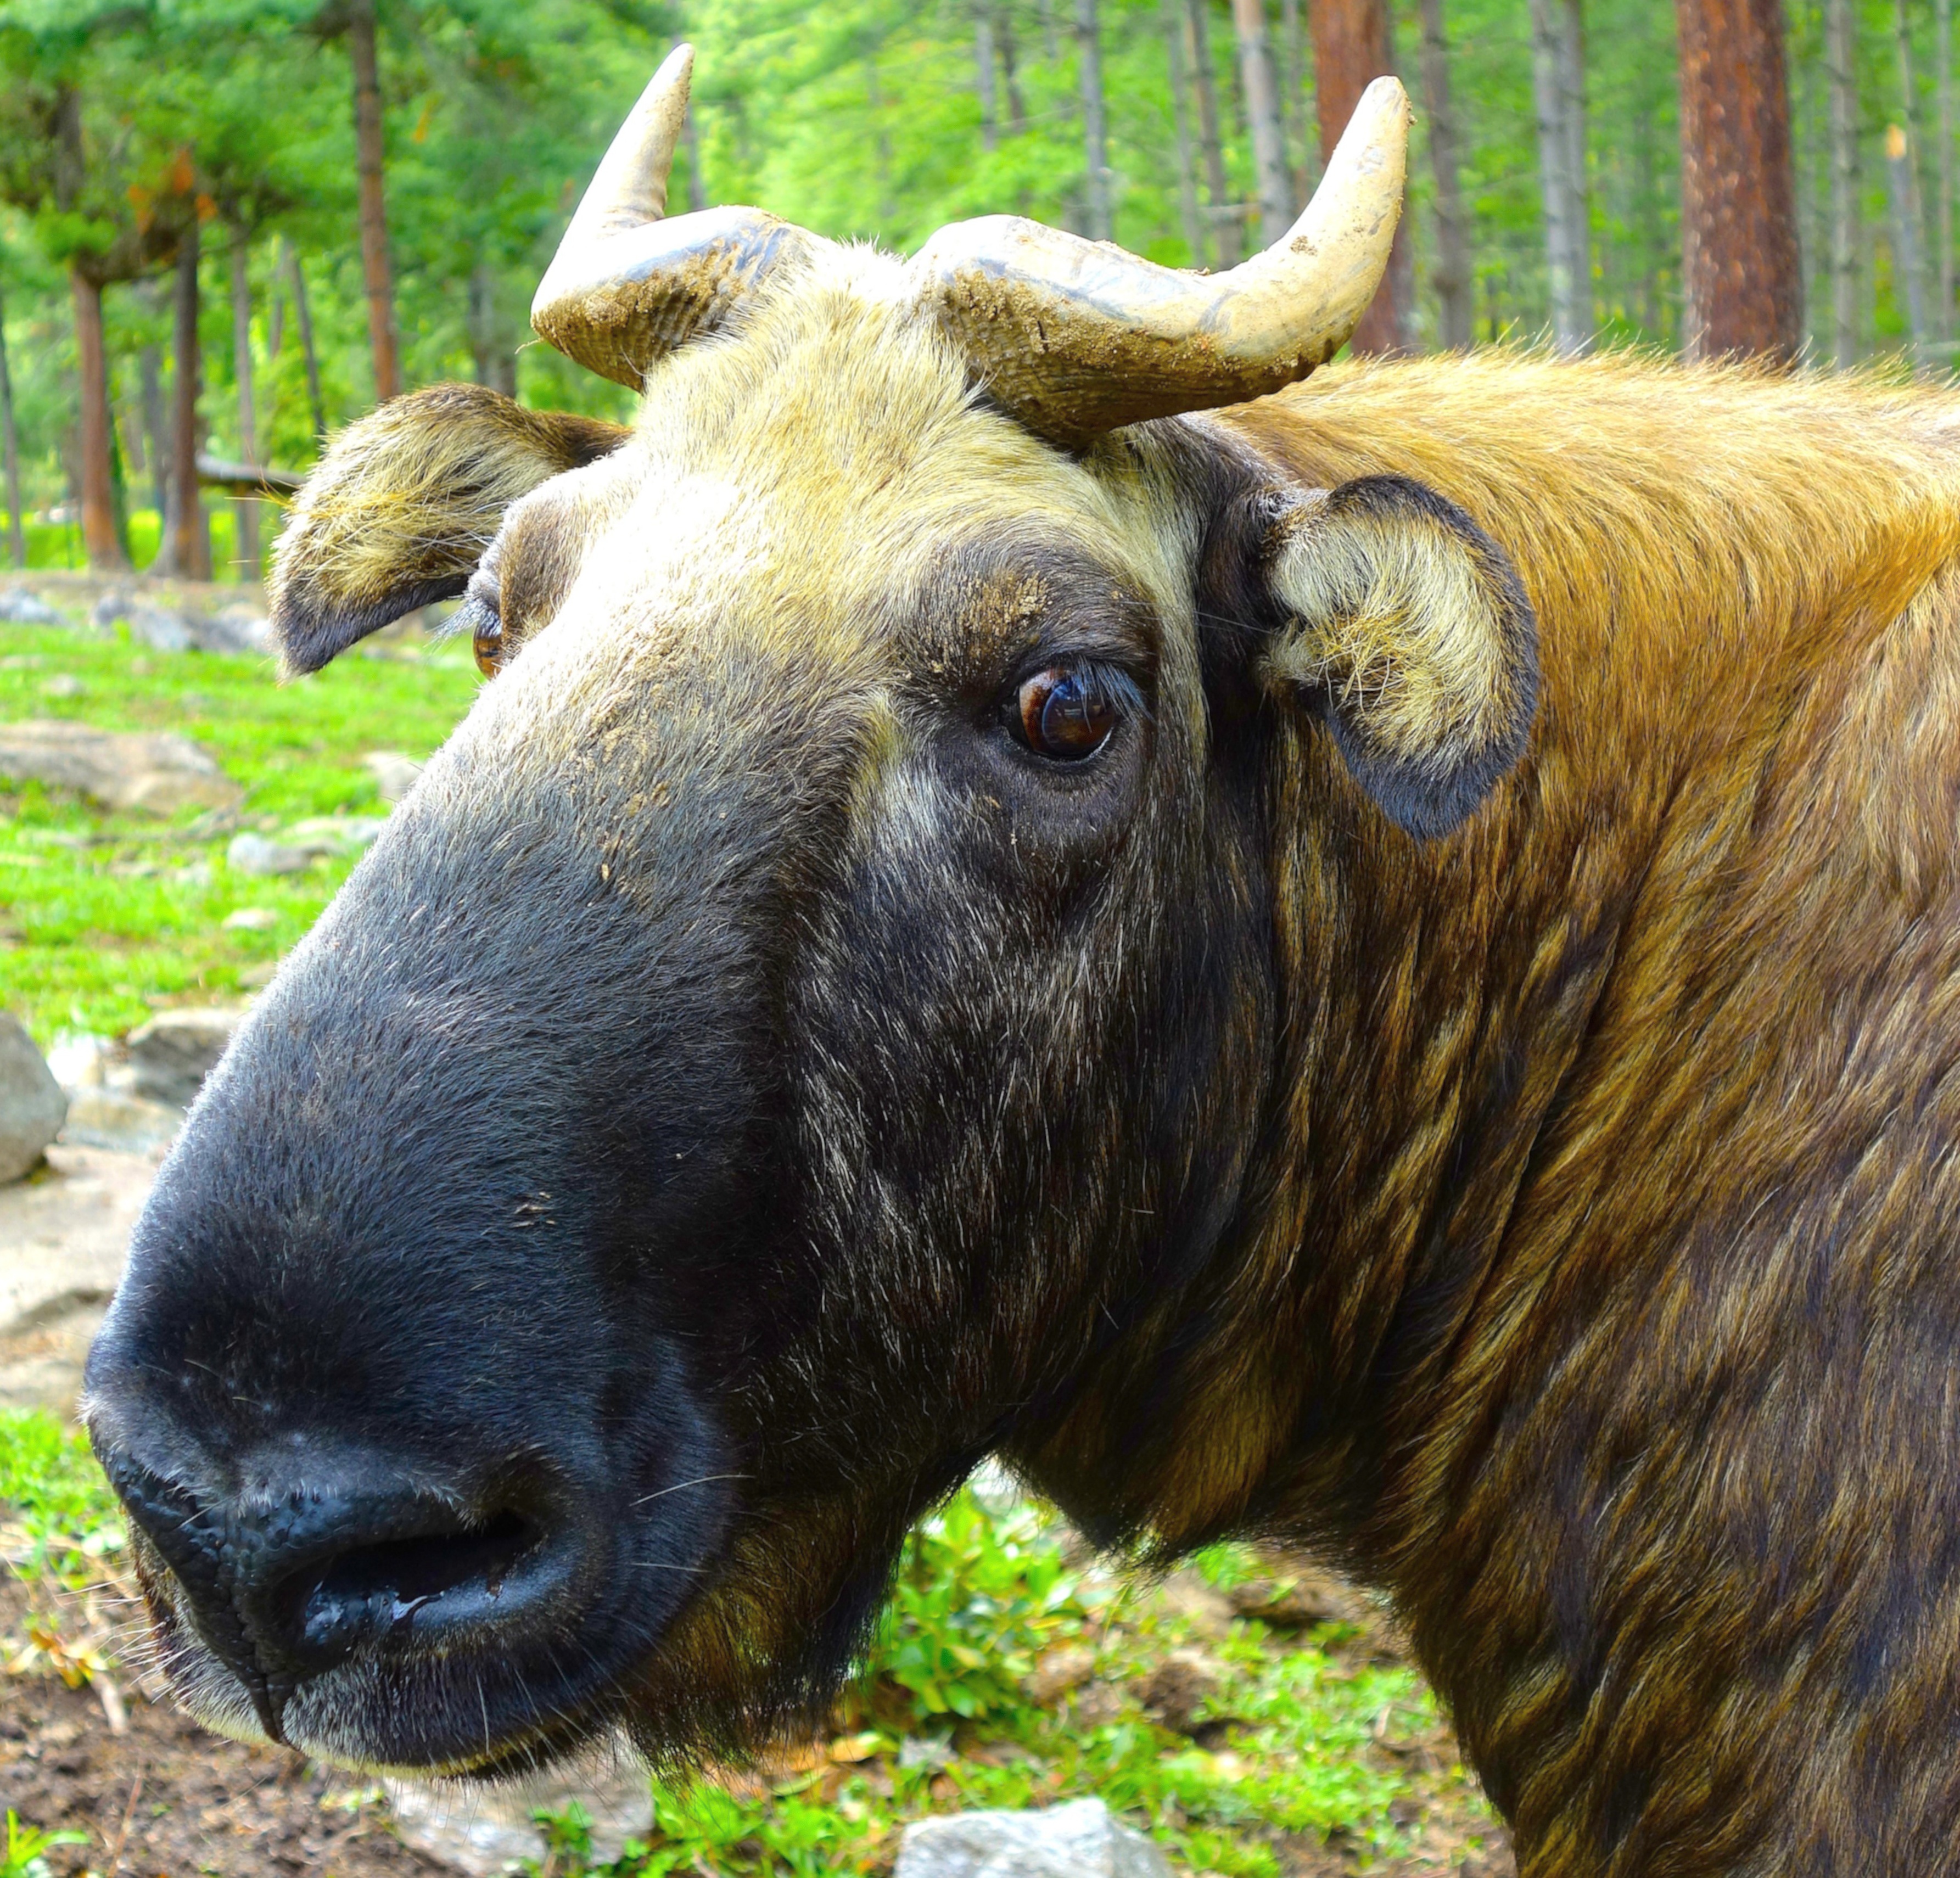 The national animal of Bhutan is a type of goat-antelope called the Takin